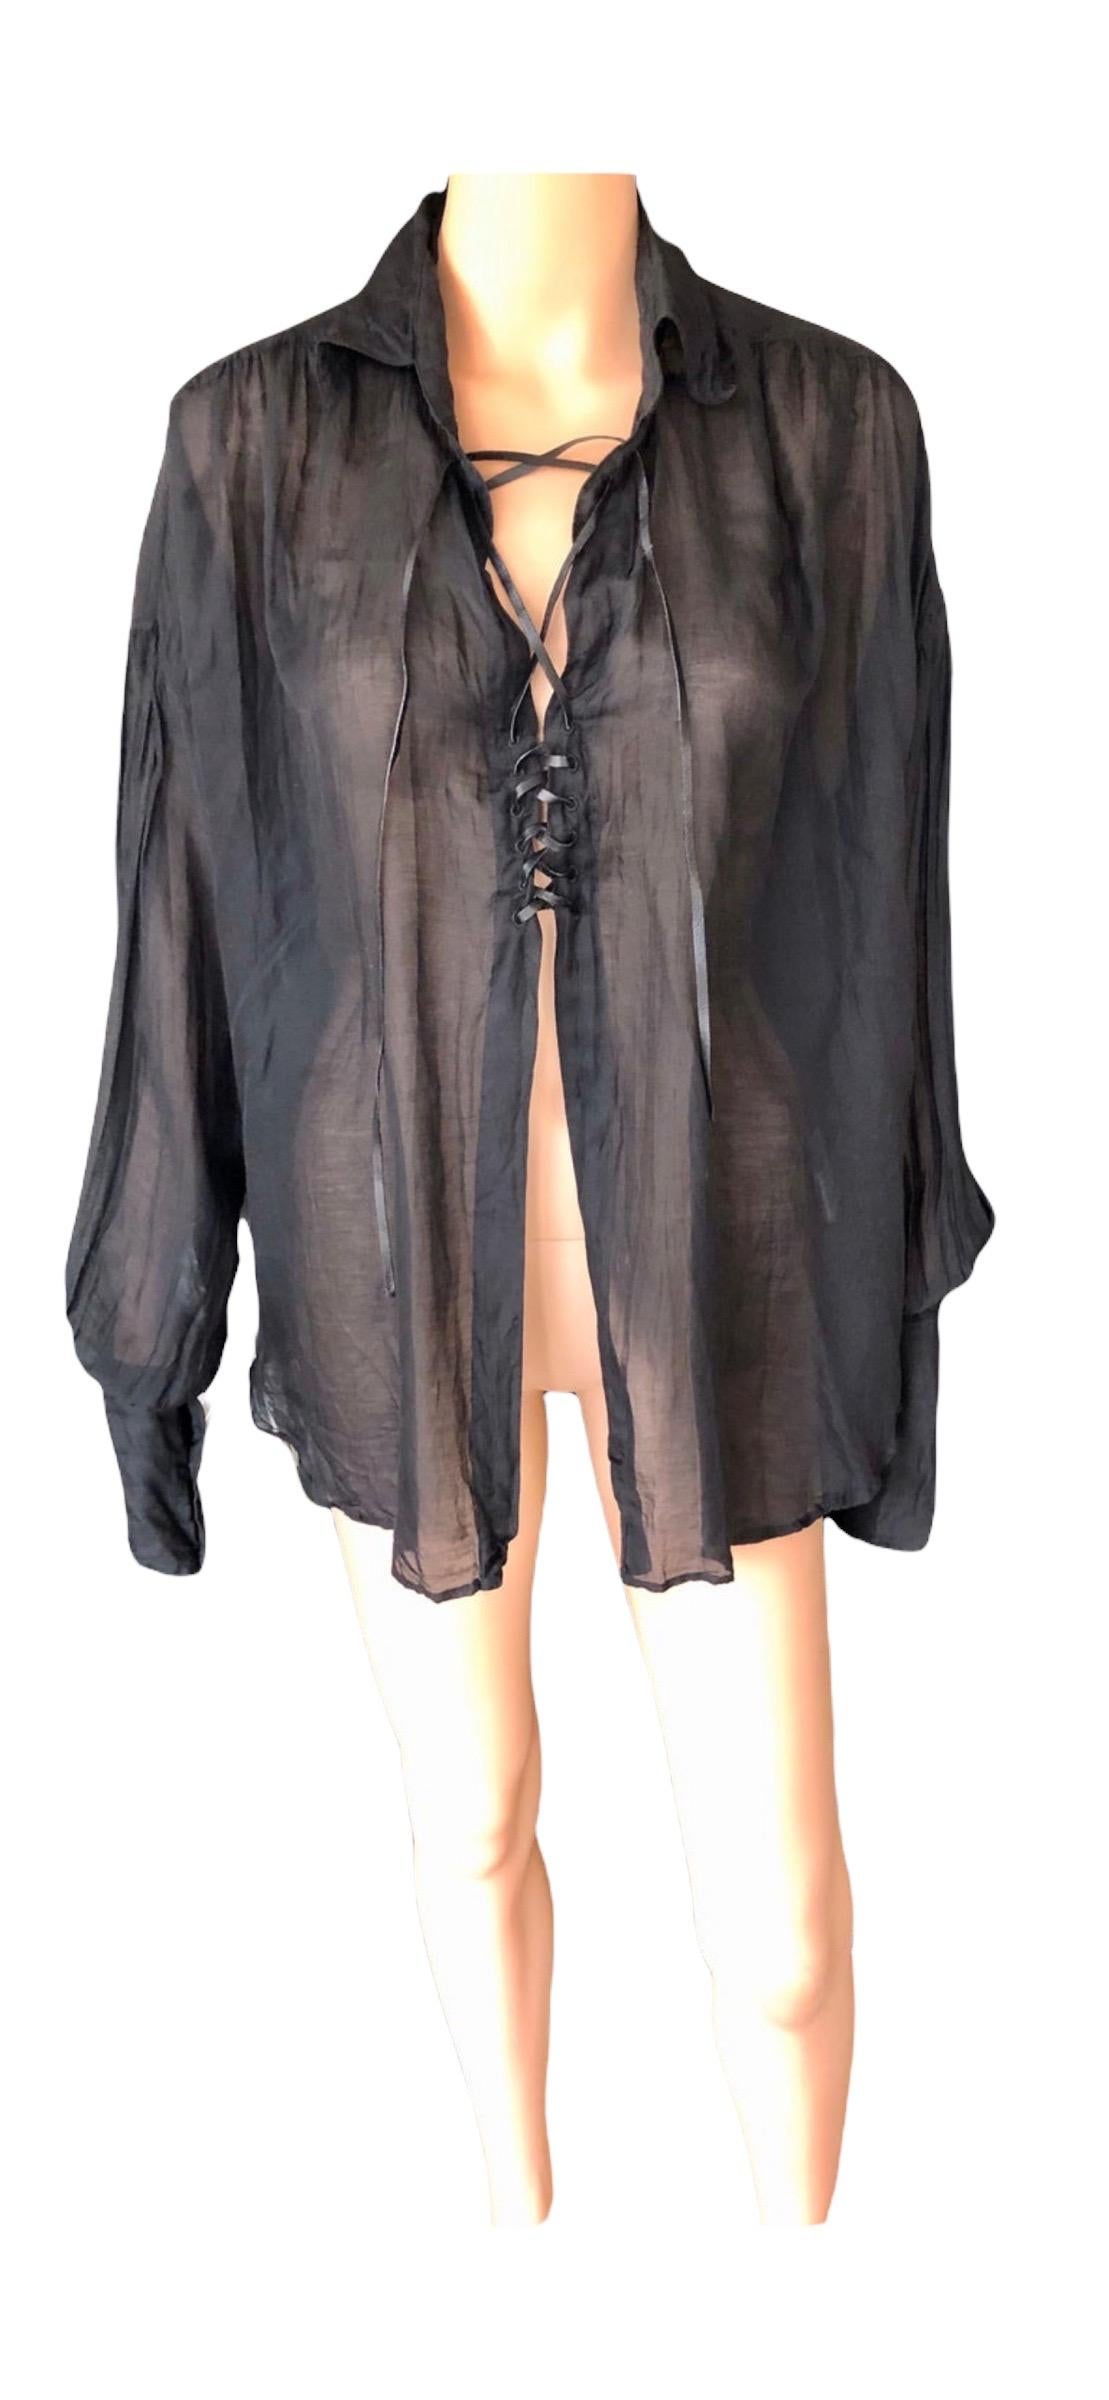 Women's Tom Ford for Gucci F/W 2002 Sheer Plunging Lace-Up Black Tunic Shirt Blouse Top For Sale